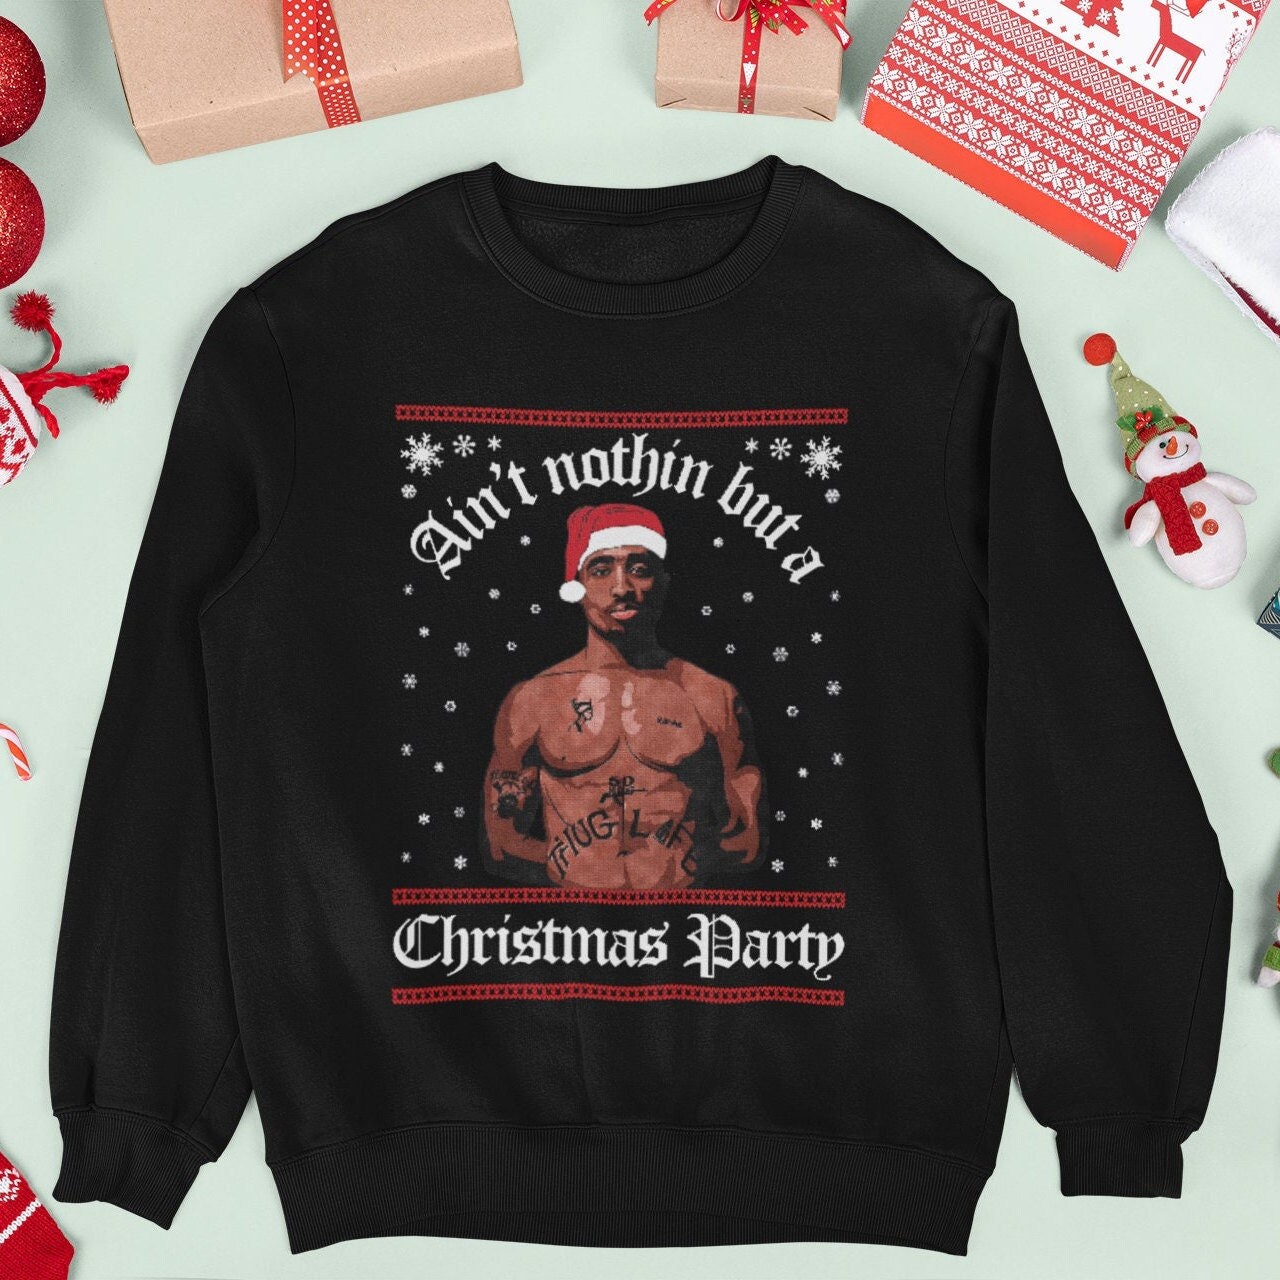 Discover Ain't Nothin But A Christmas Party | 2Pac Inspired Christmas Sweatshirt